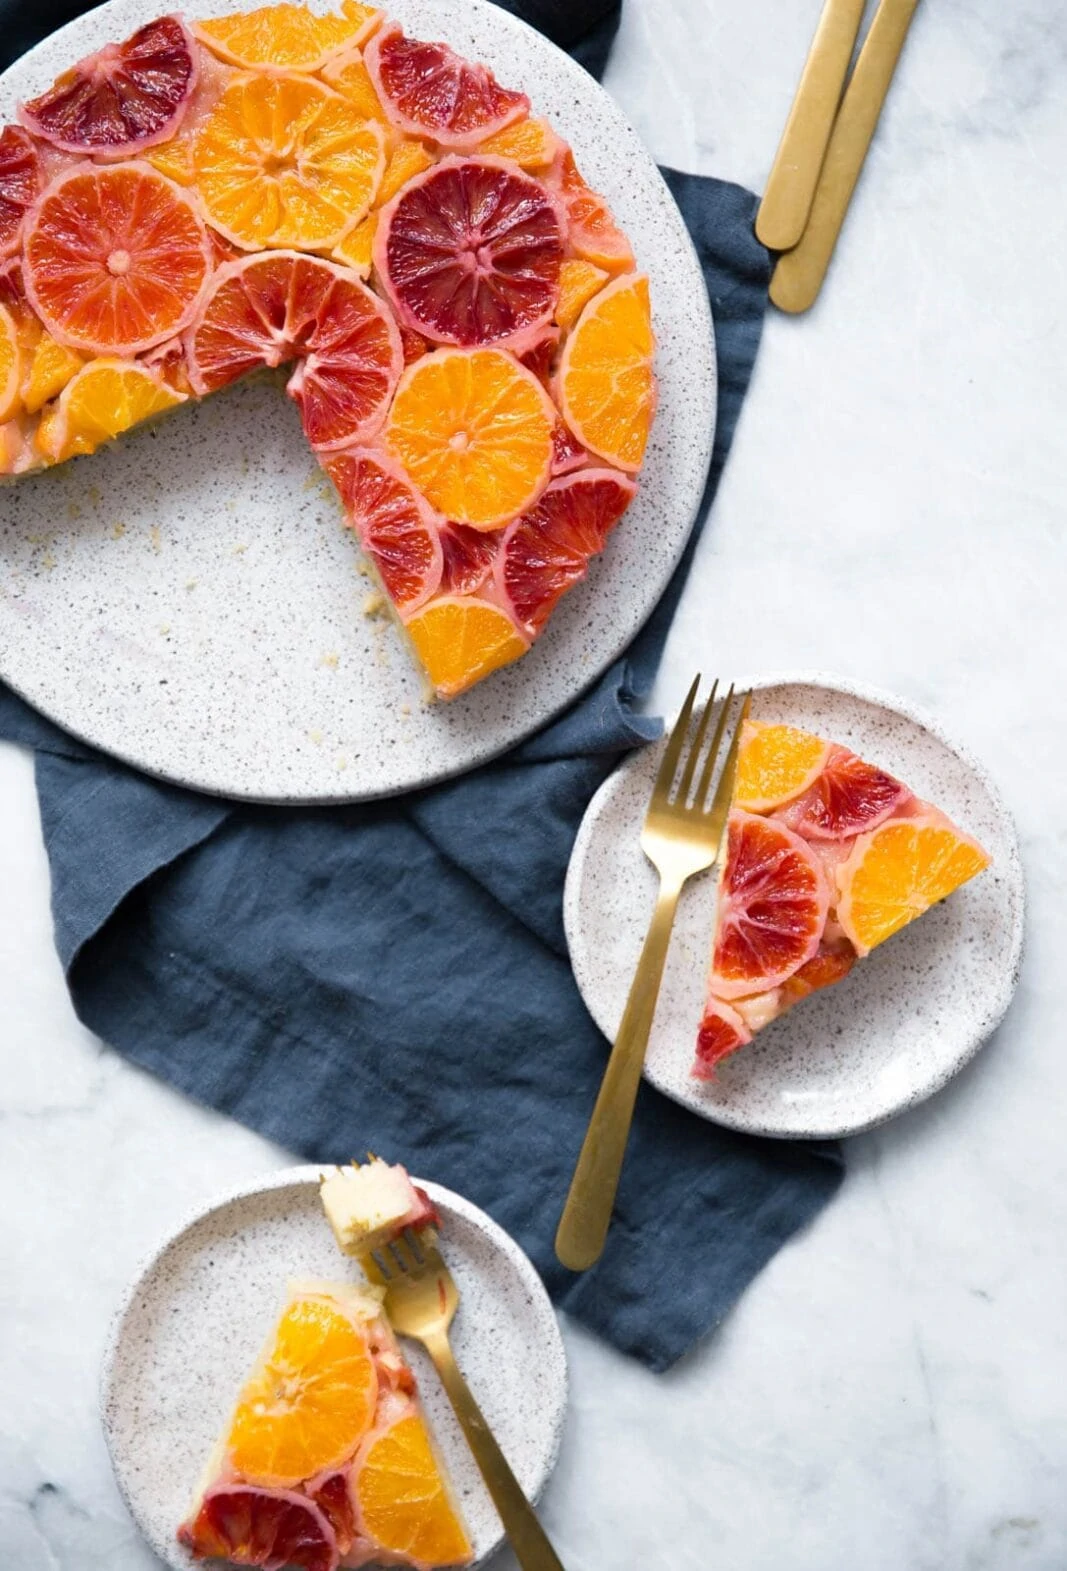 An easy upside down winter citrus cake that will brighten anyone's day.